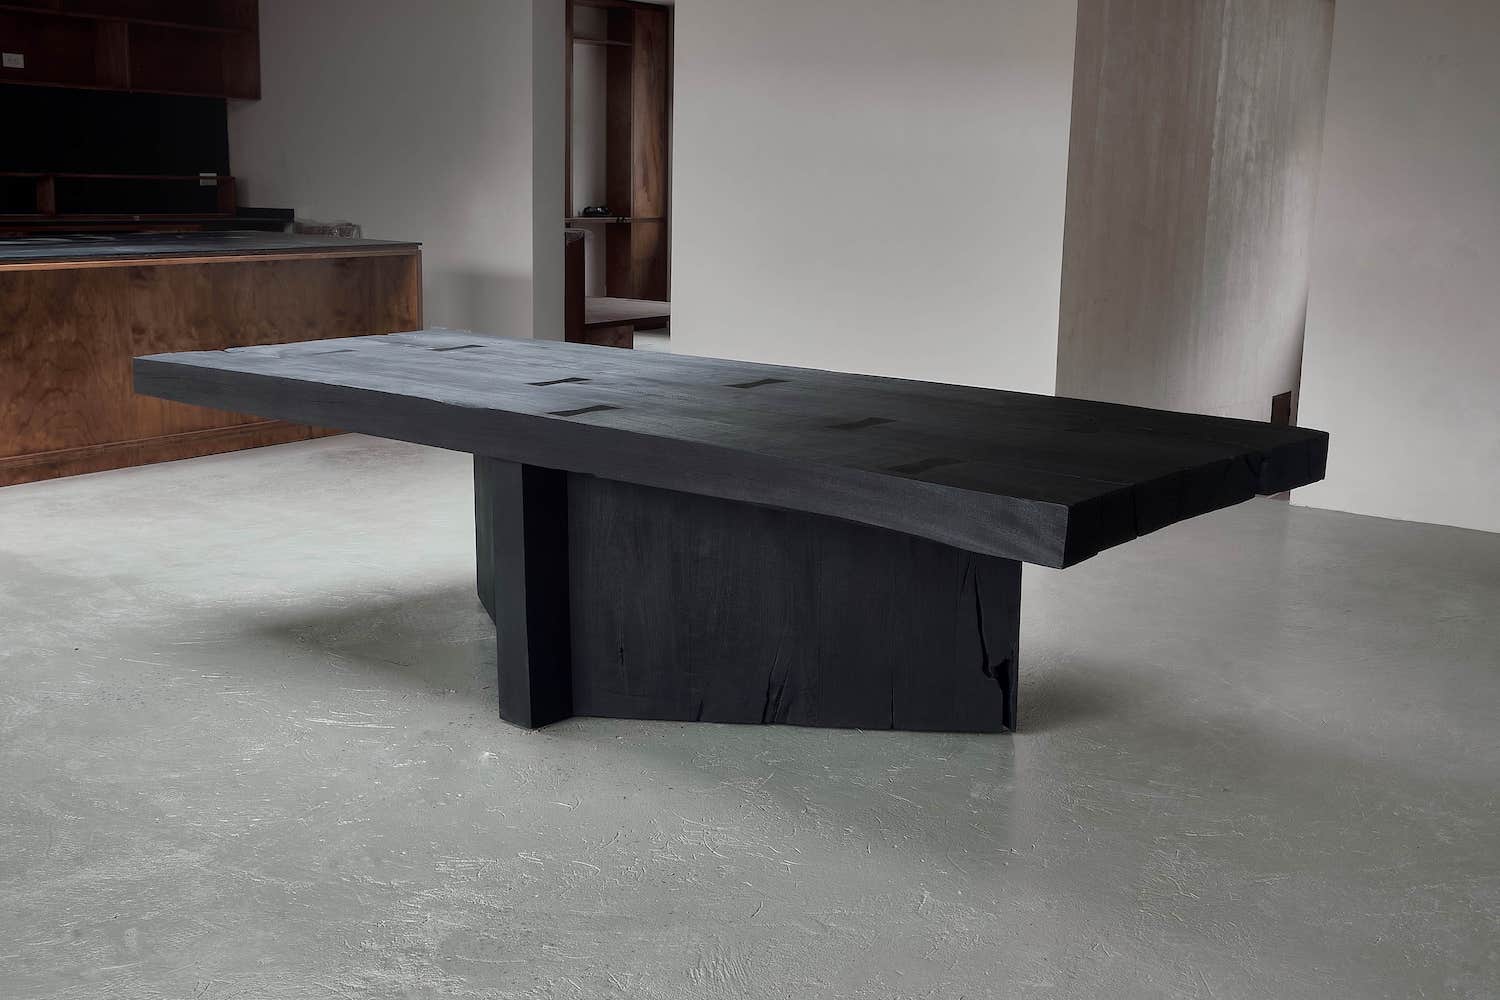  A monolithic wood dining table entirely burned by hand and made to withstand heavy user traffic, the Table Acros features a wide, rectangular surface and bold, asymmetric footing that feels wrought from nature.